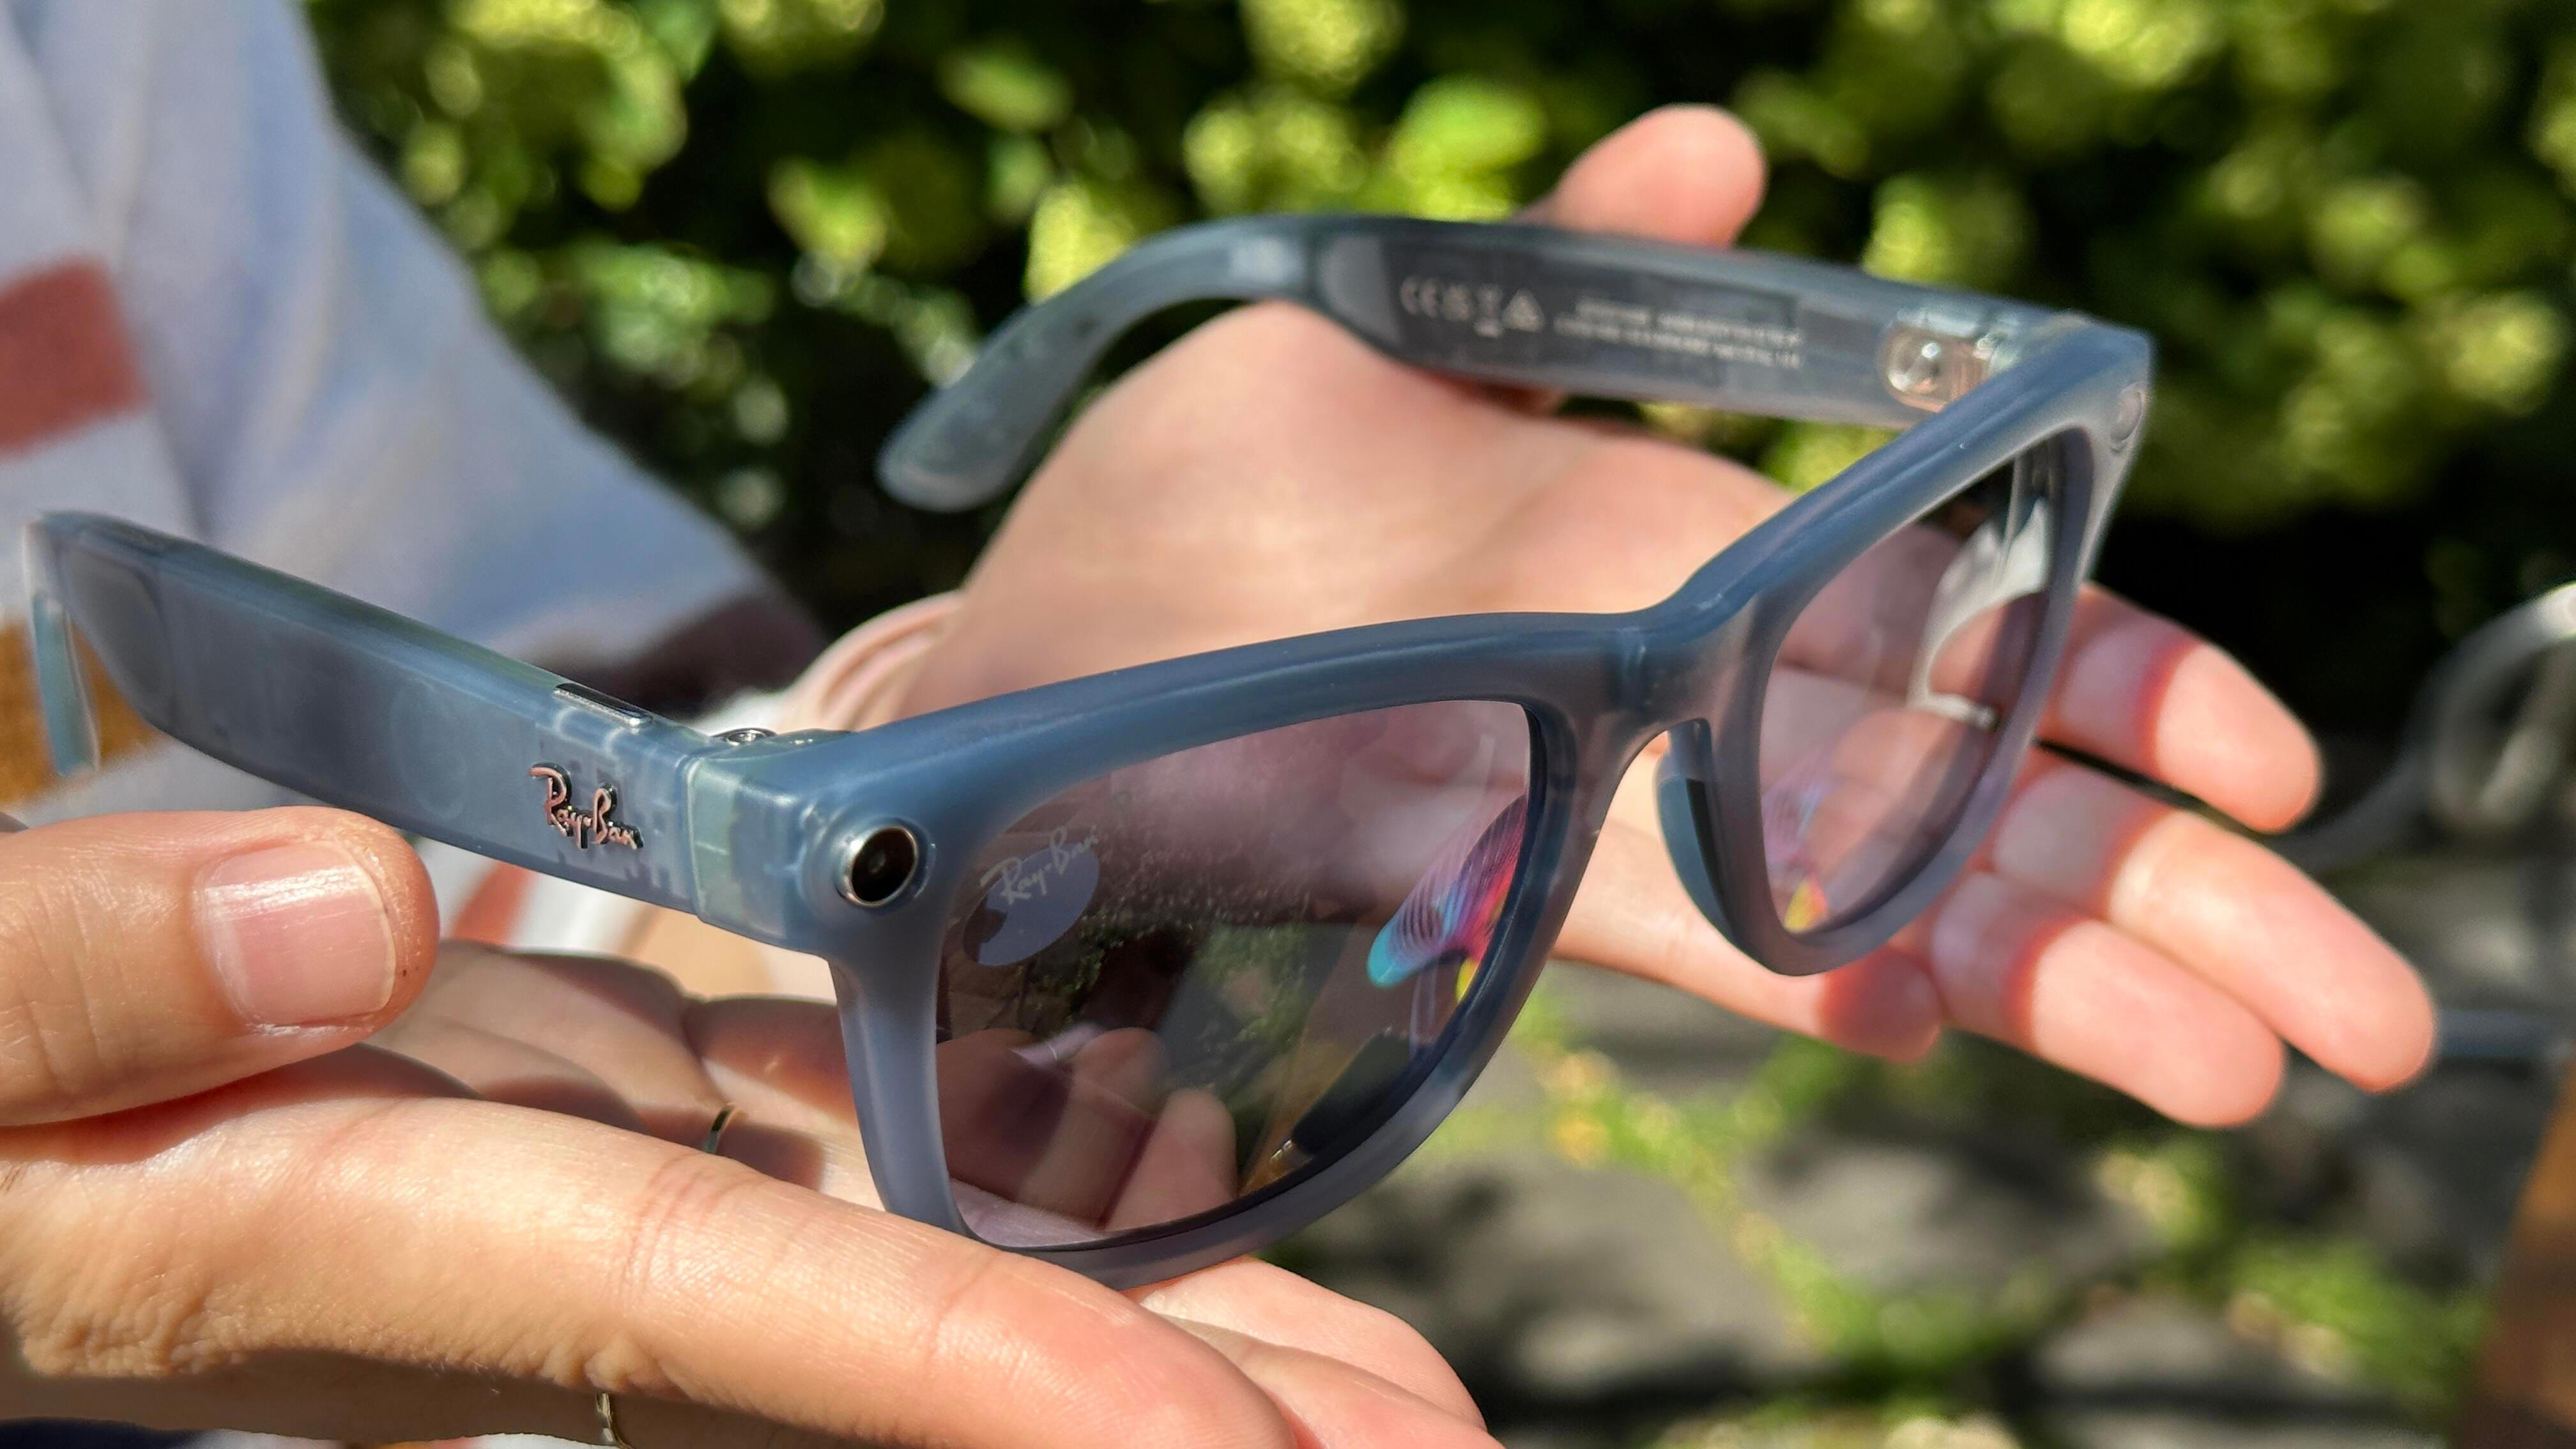 Meta's Ray-Ban Glasses Added AI That Can See What You're Seeing